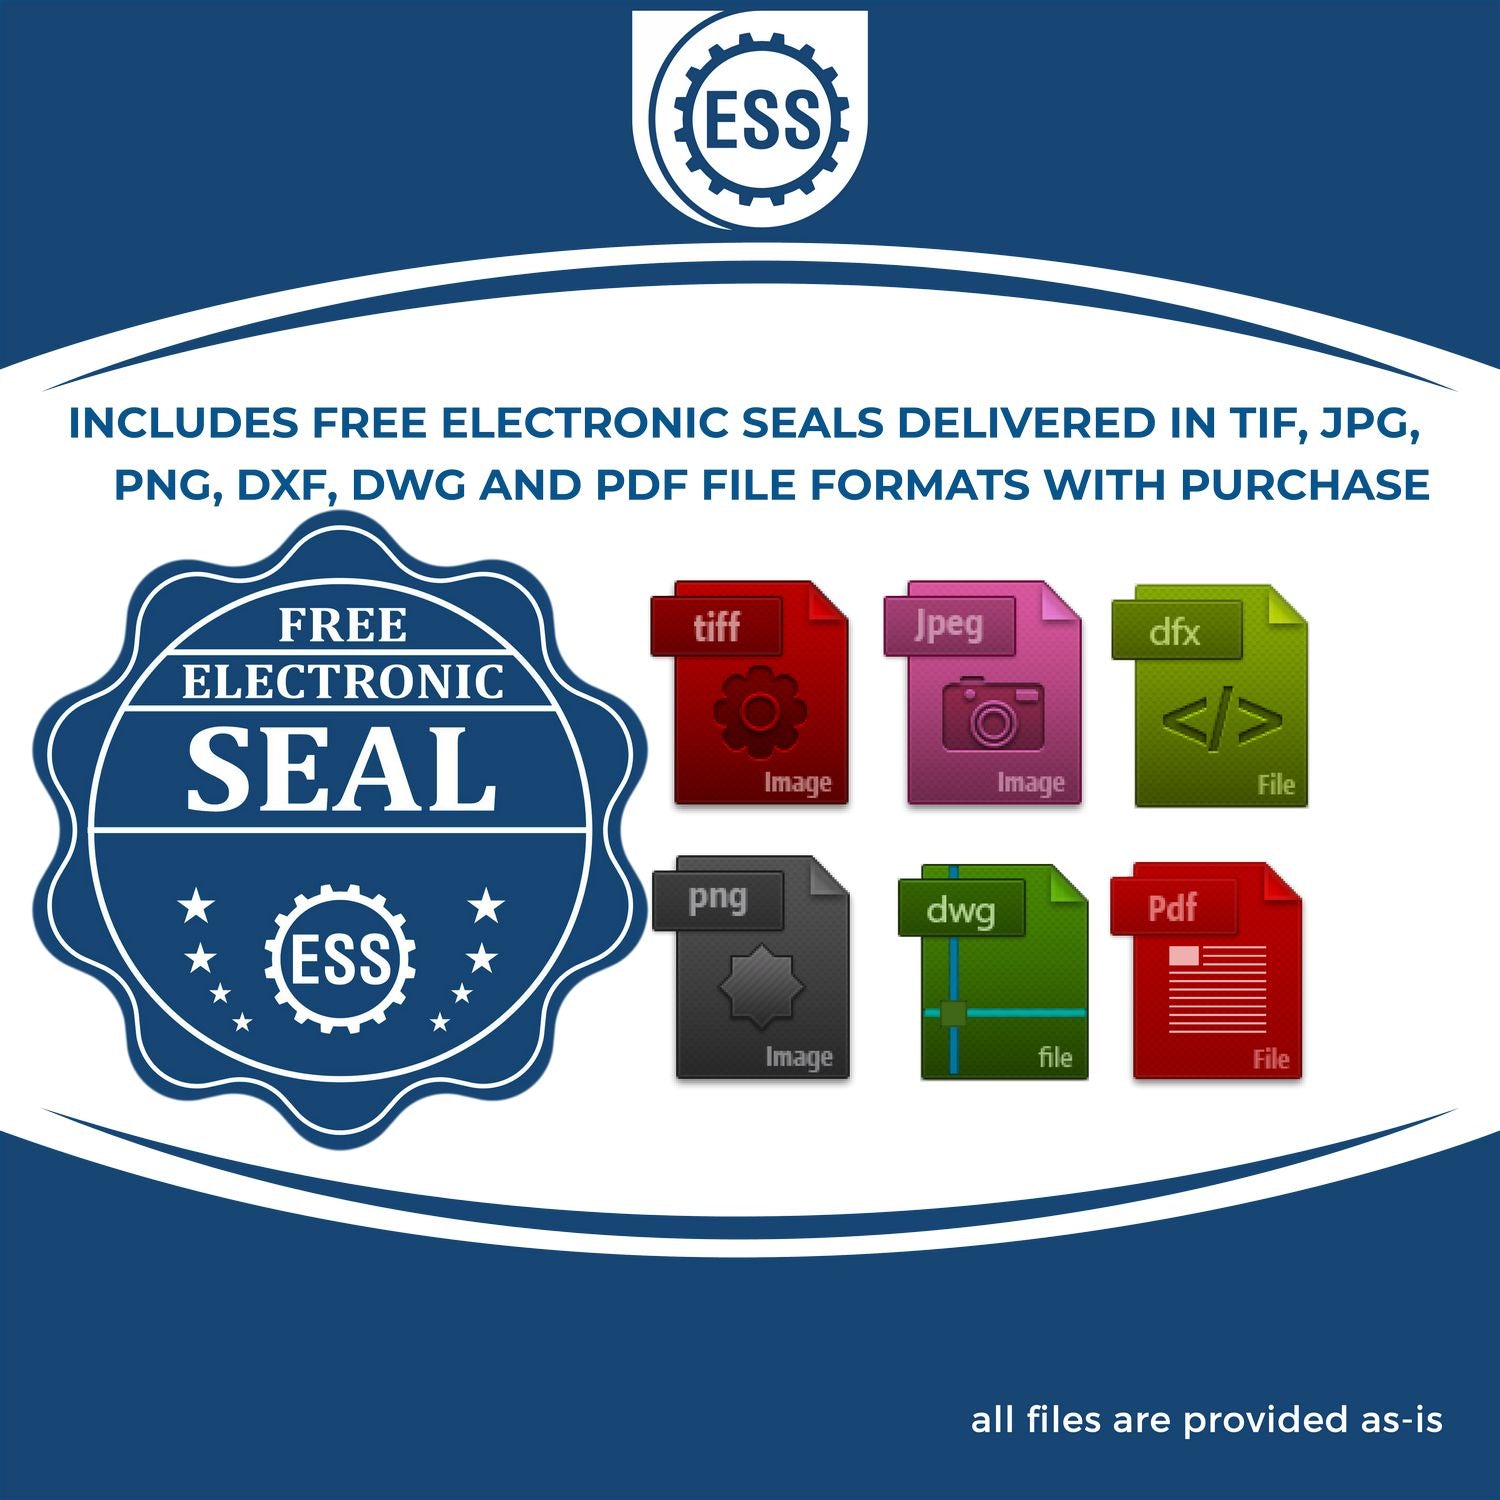 An infographic for the free electronic seal for the Slim Pre-Inked North Carolina Architect Seal Stamp illustrating the different file type icons such as DXF, DWG, TIF, JPG and PNG.